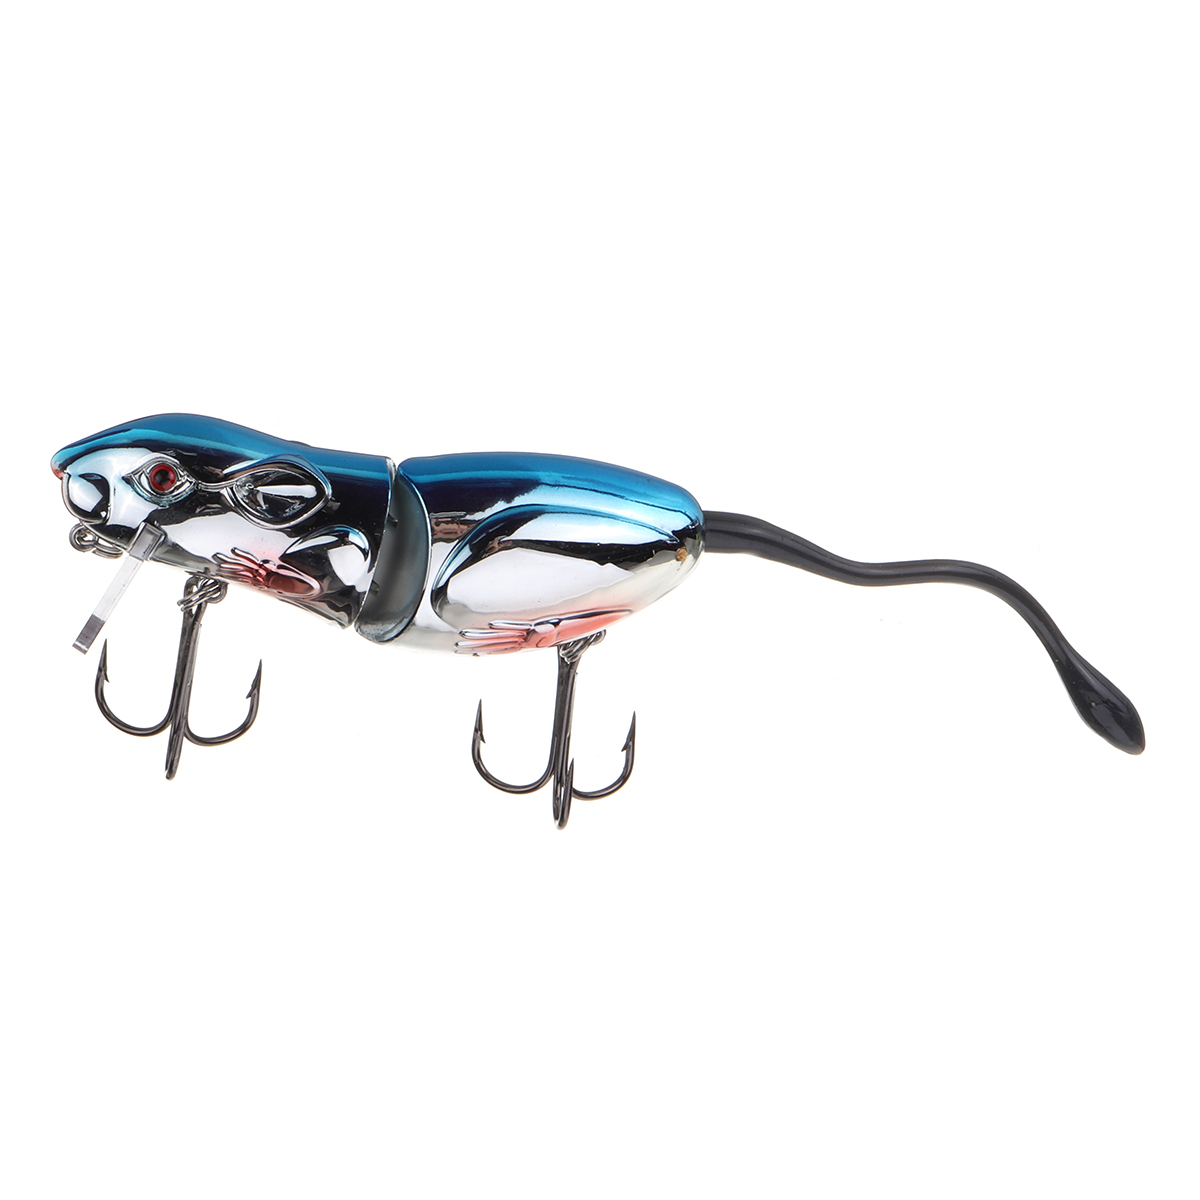 ZANLURE-1PC-16CM-45g-3D-Eyes-Mice-Rat-Shape-Lure-Artificial-Fishing-Bait-With-2-Hooks-Fishing-Tackle-1646066-6